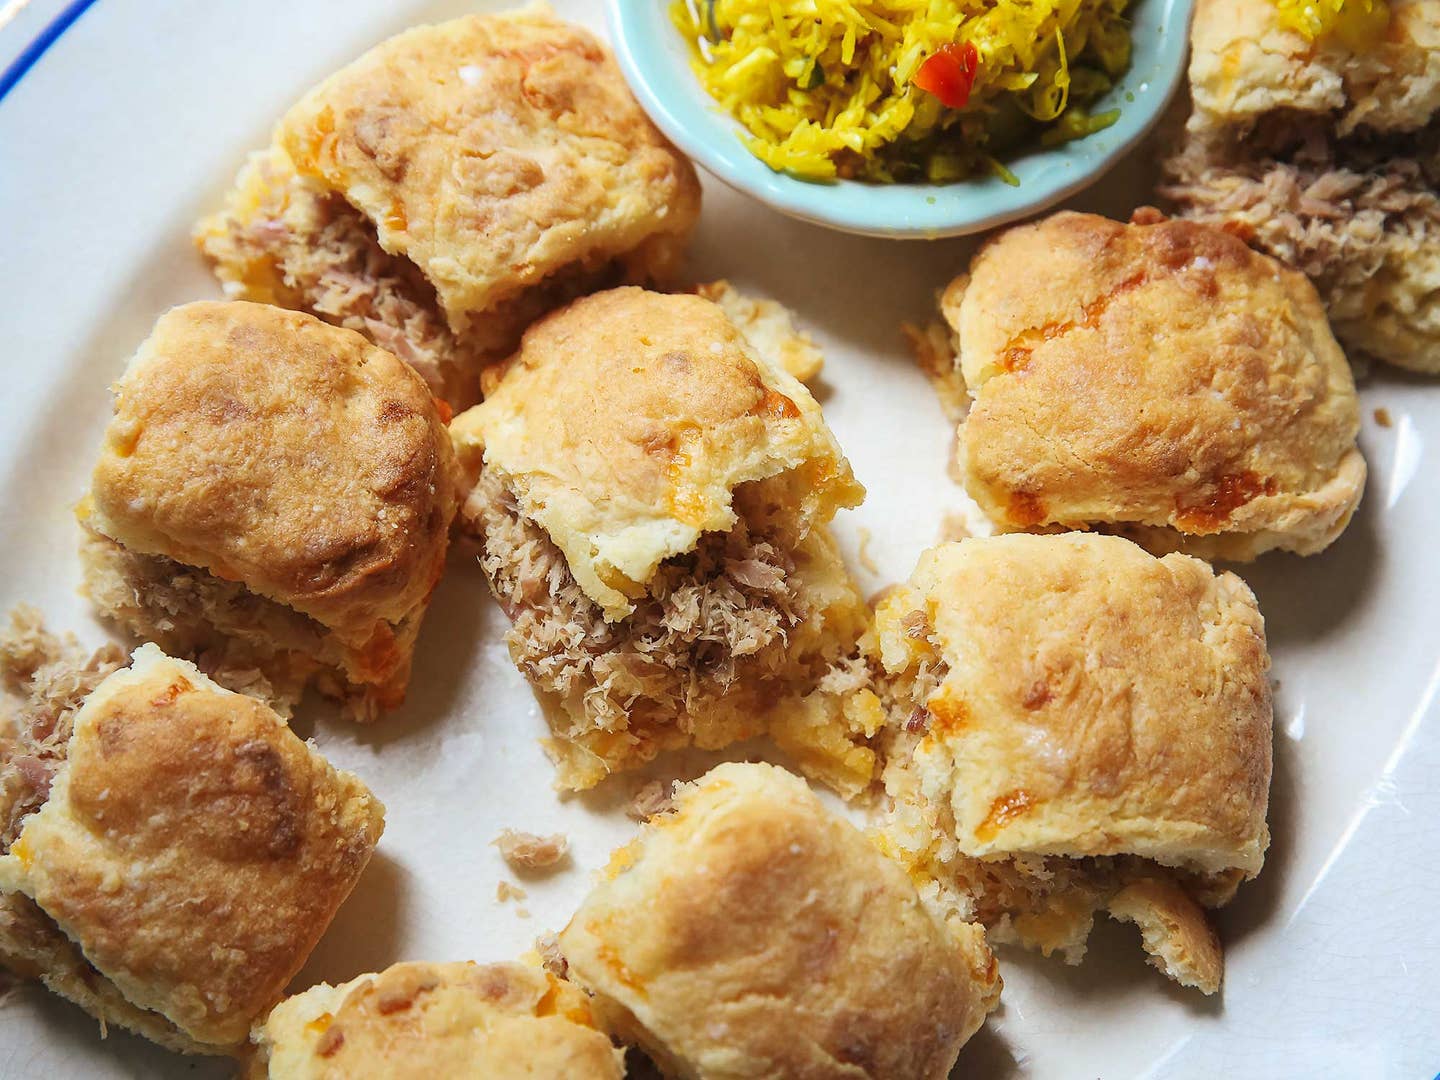 You Should Serve These Biscuits at Your Next Cocktail Party